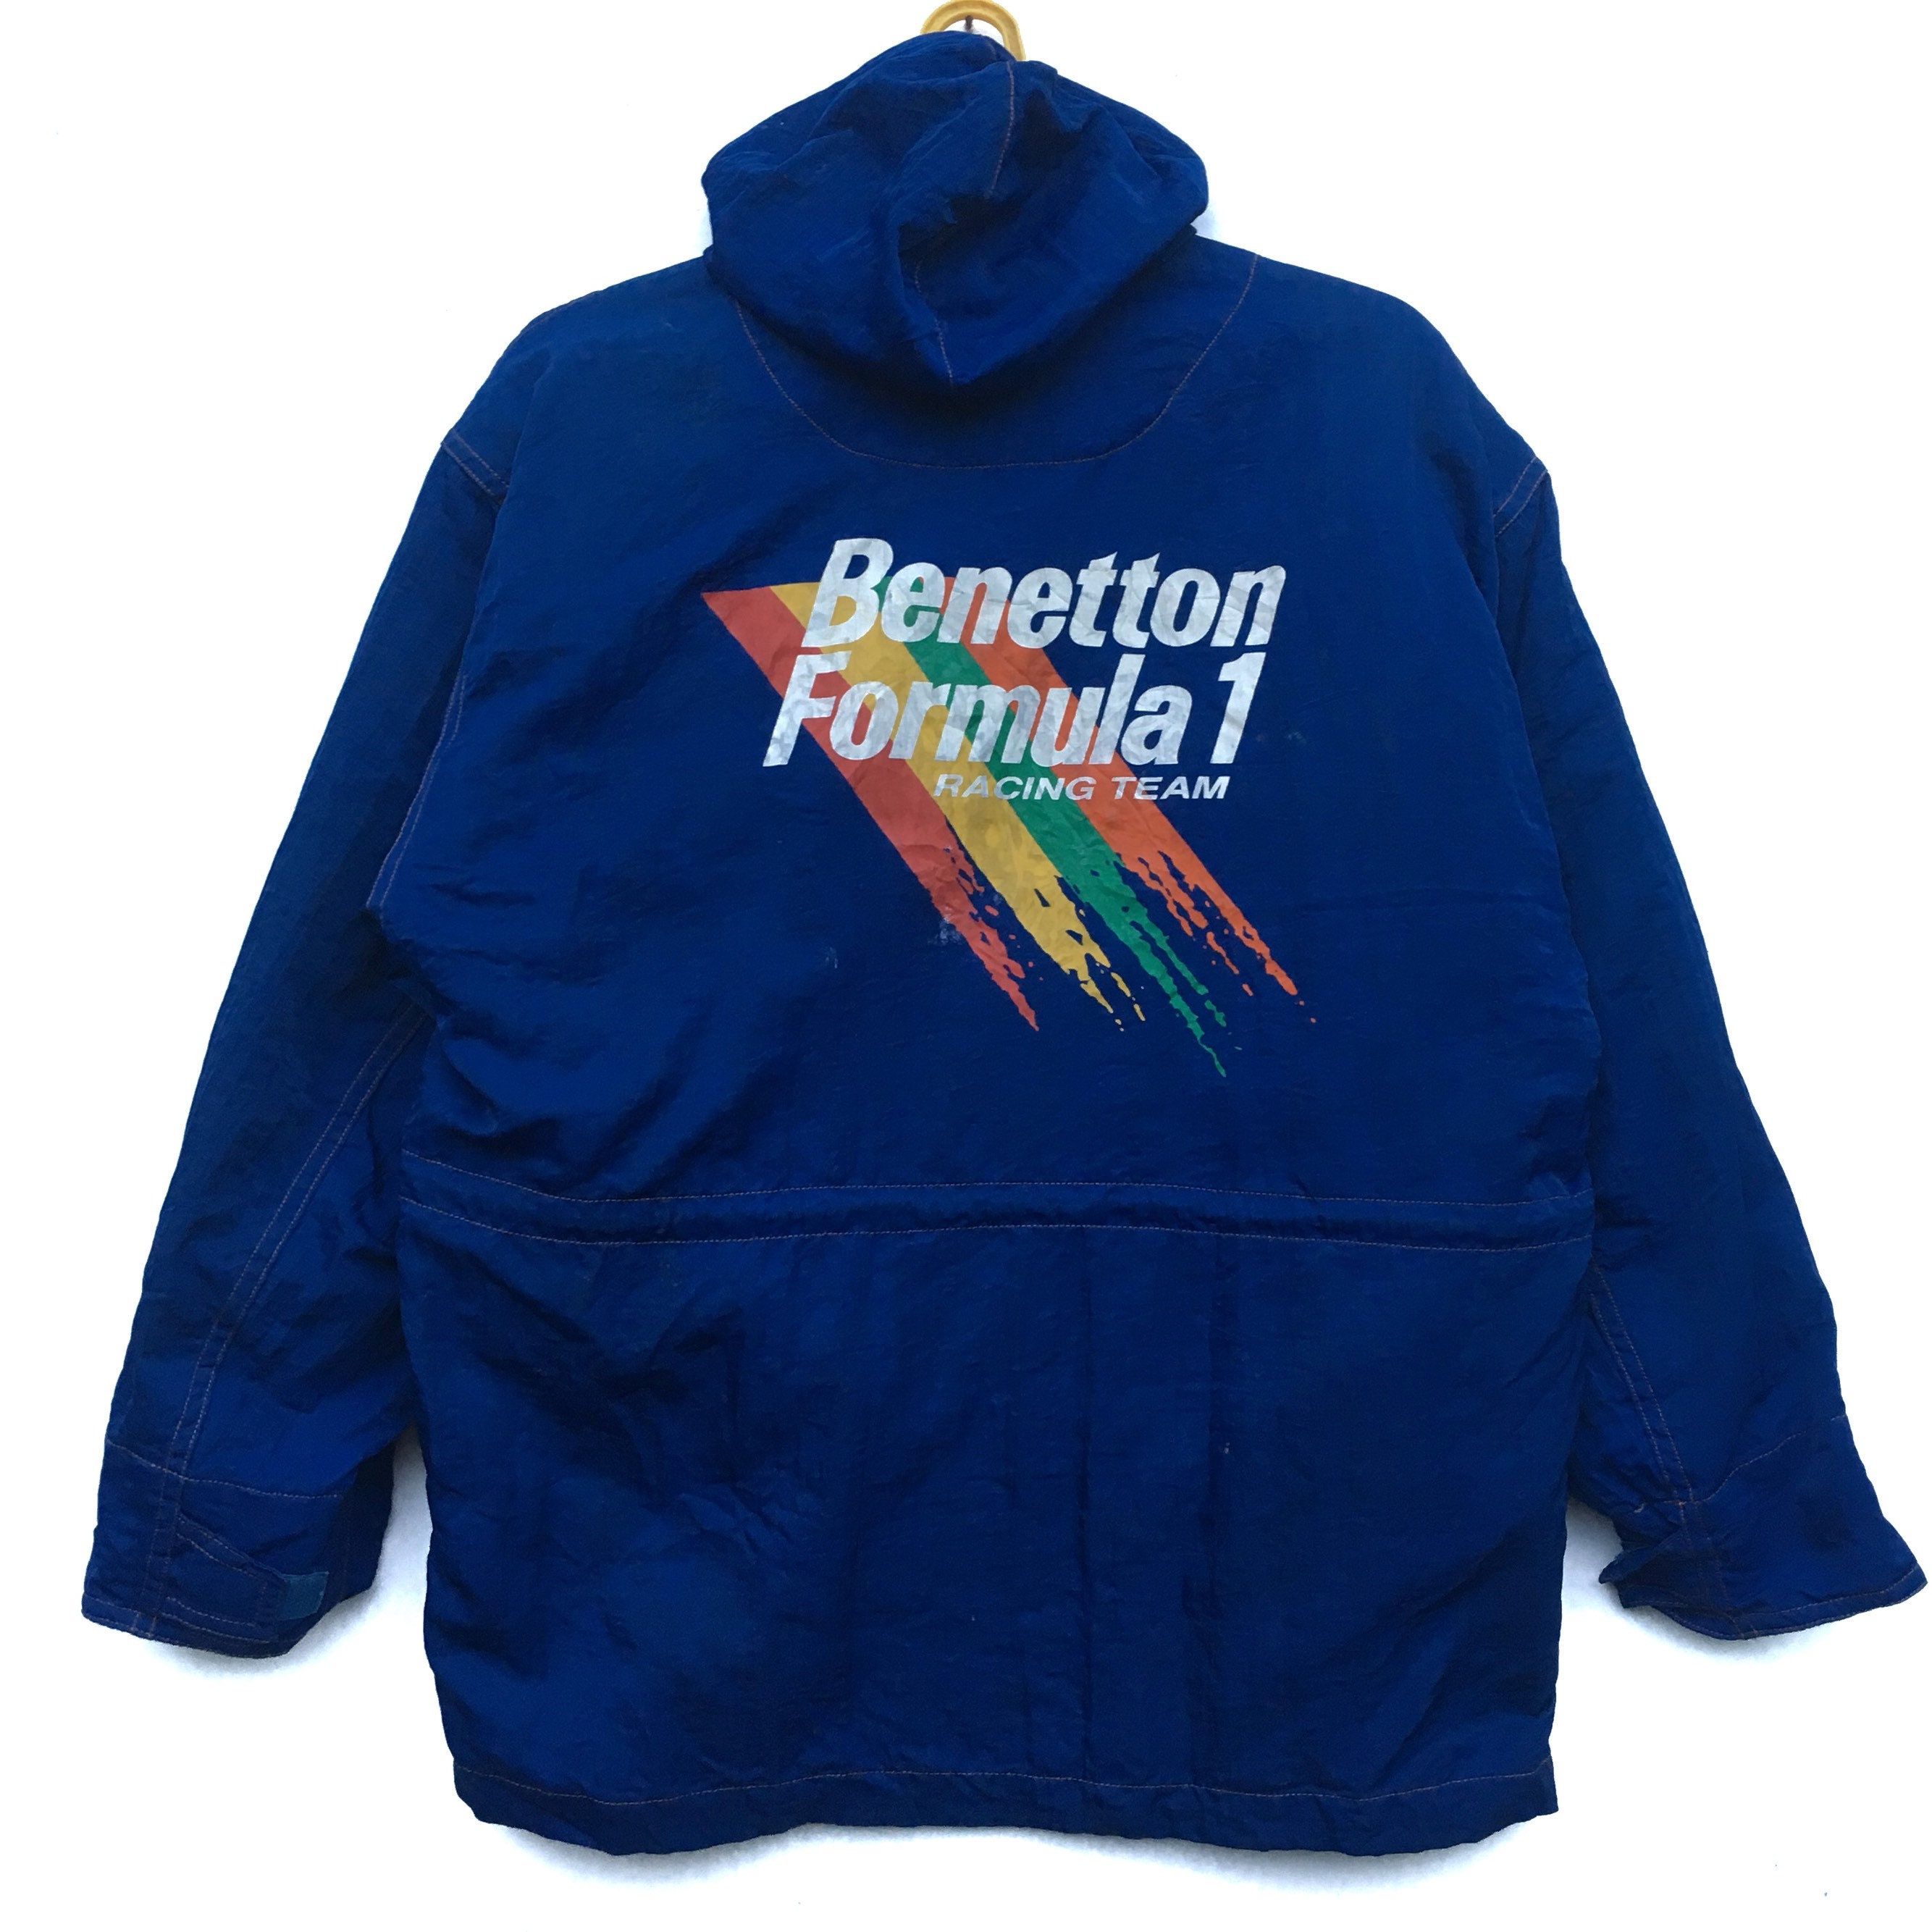 Vintage 90s BENETTON Jacket Hoodie Zipper Formula 1 Racing Team Parka  United Colour of Benetton Spell Out Size 48 - Etsy